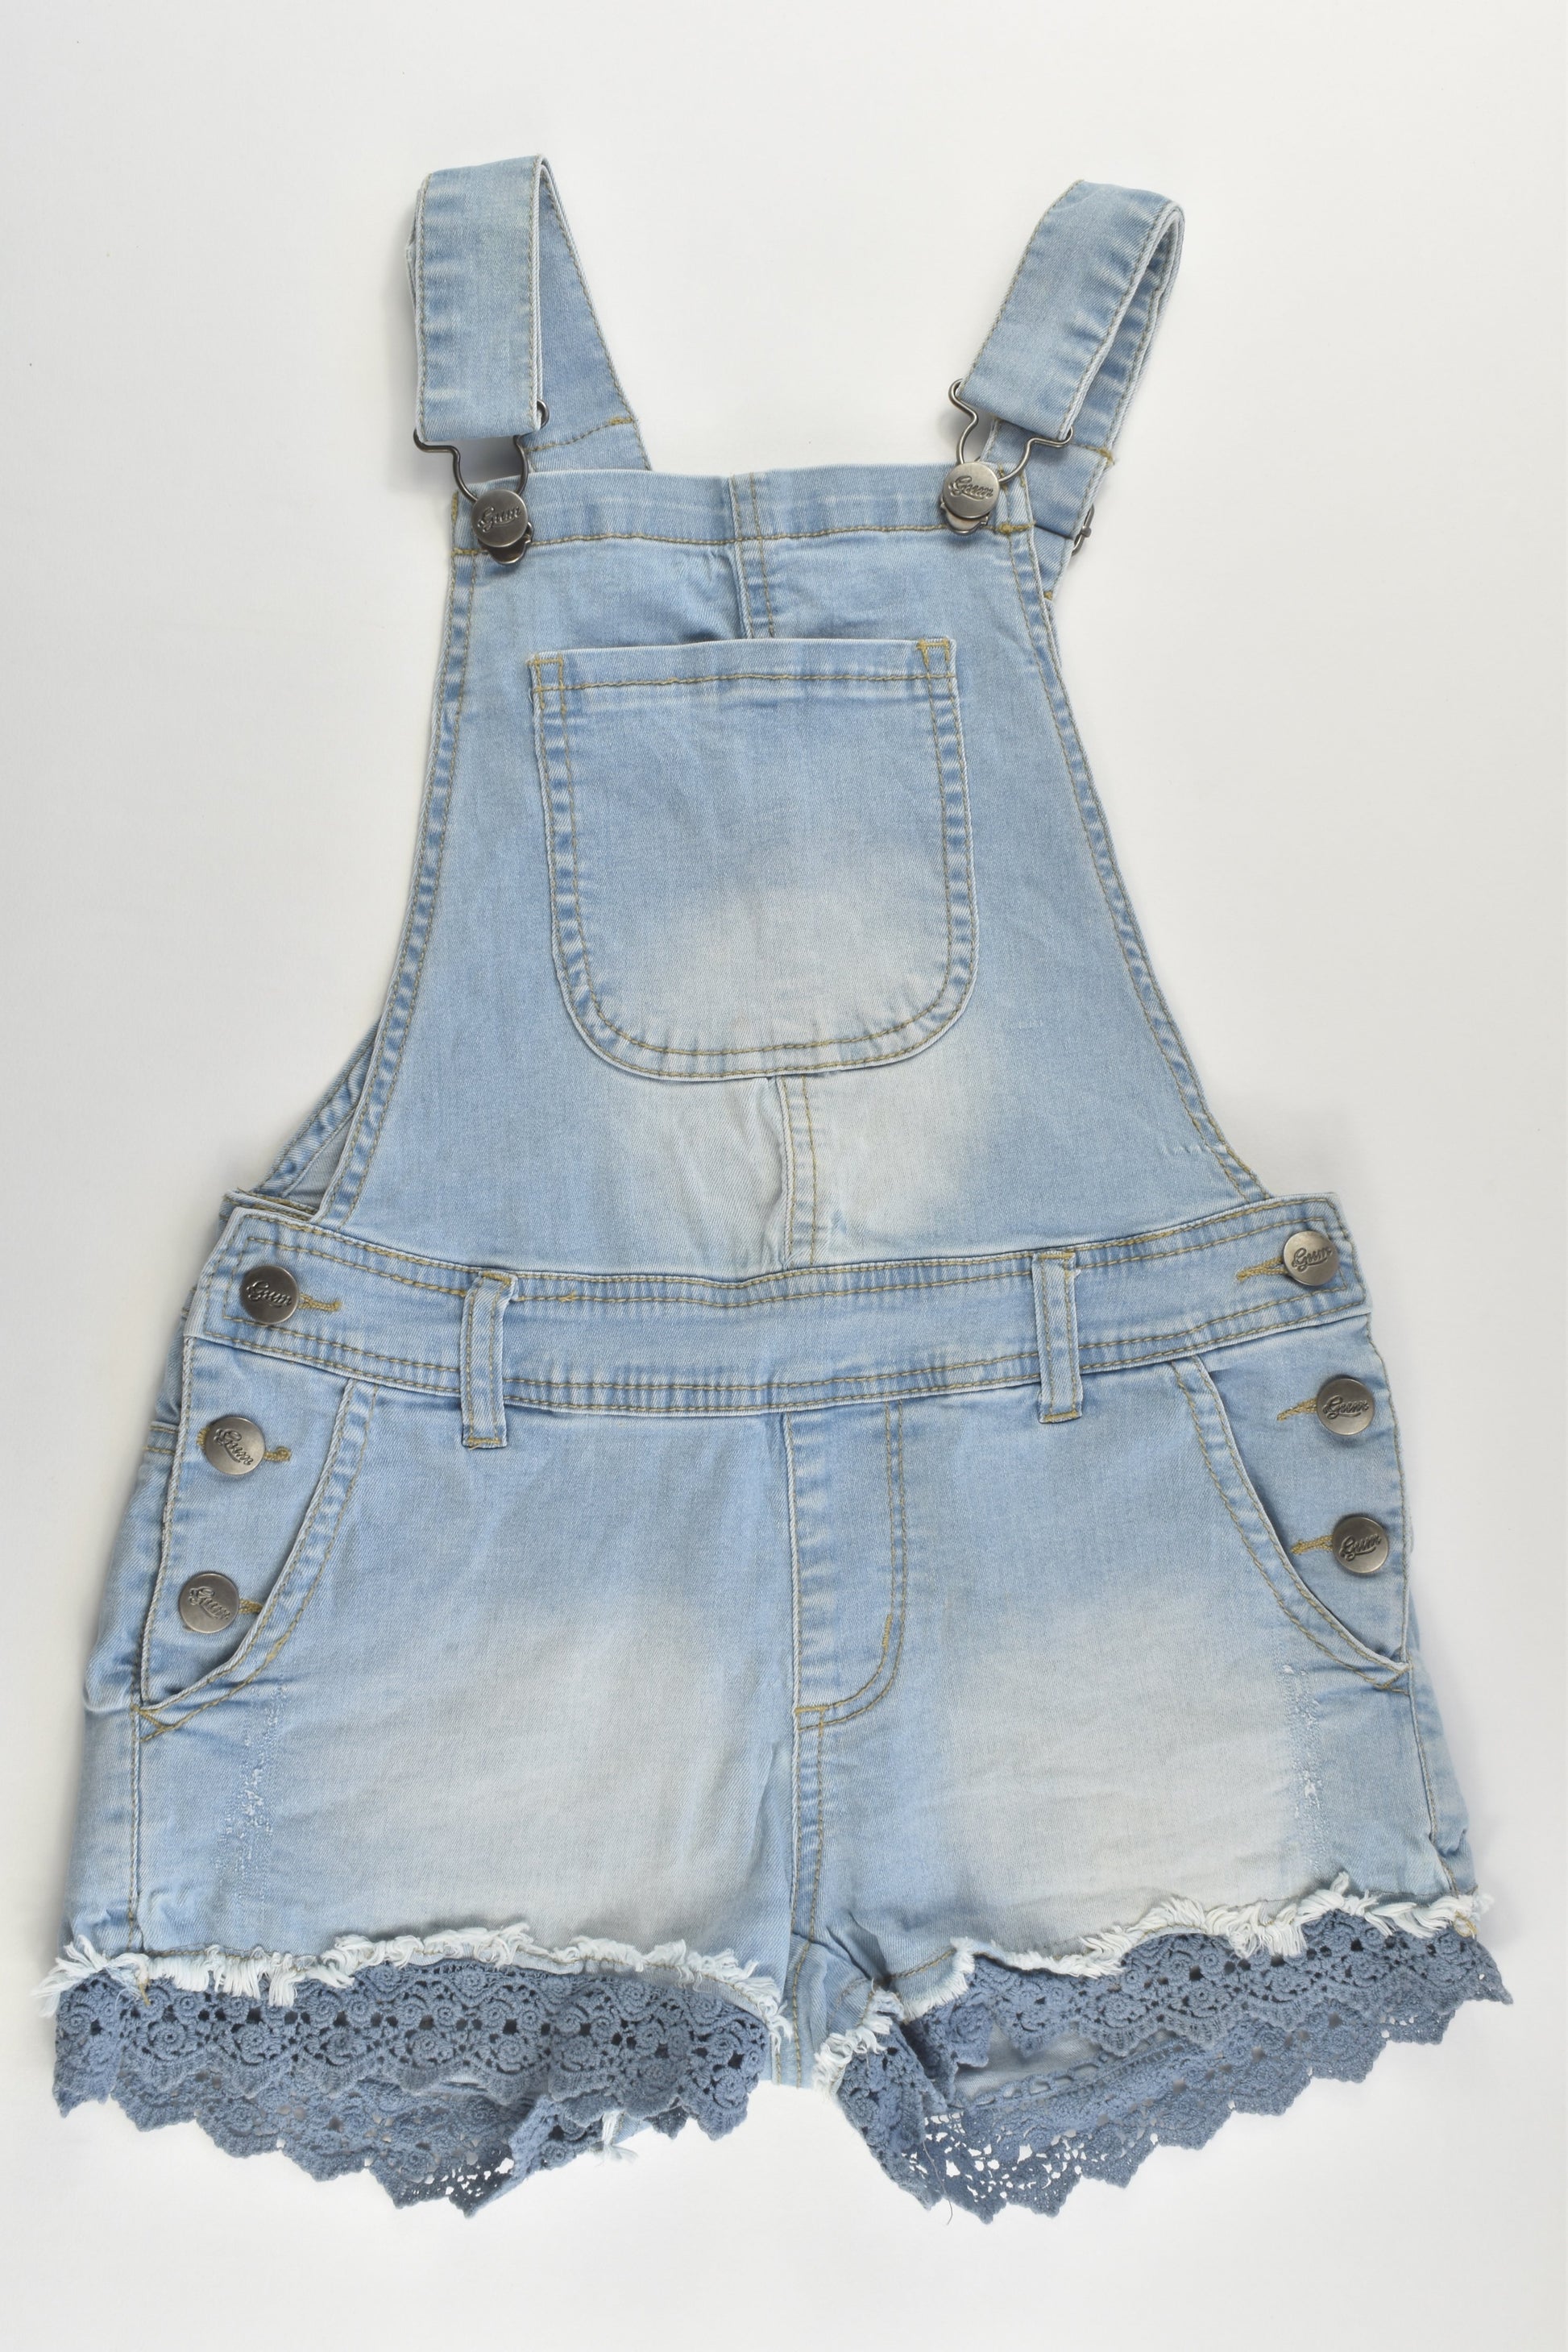 Gum Size 8 Stretchy Denim Short Overalls with Lace Details